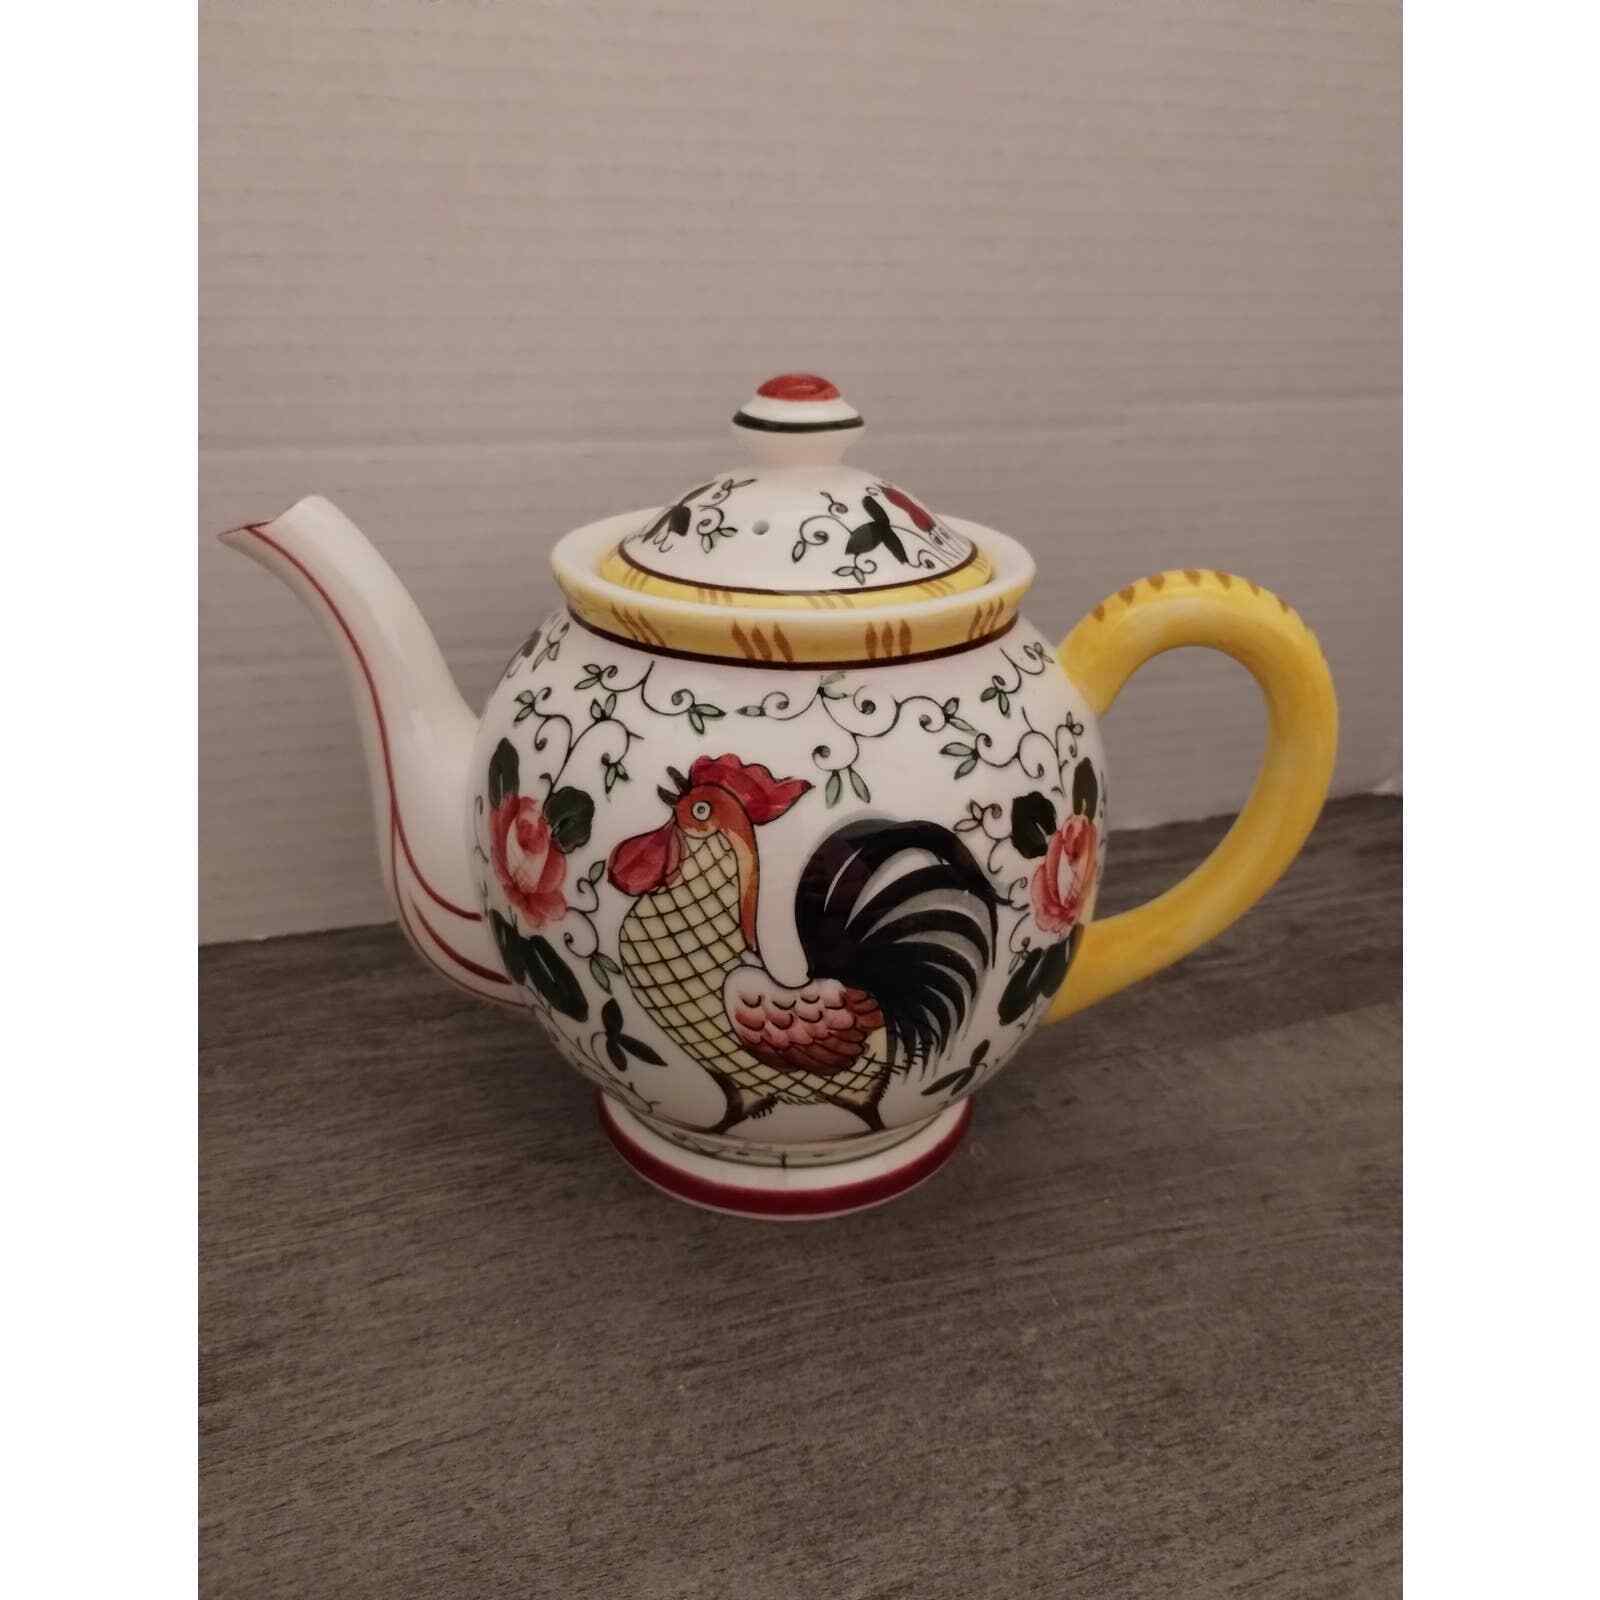 Early Provincial Ucagco Japan Rooster & Roses Vintage Teapot